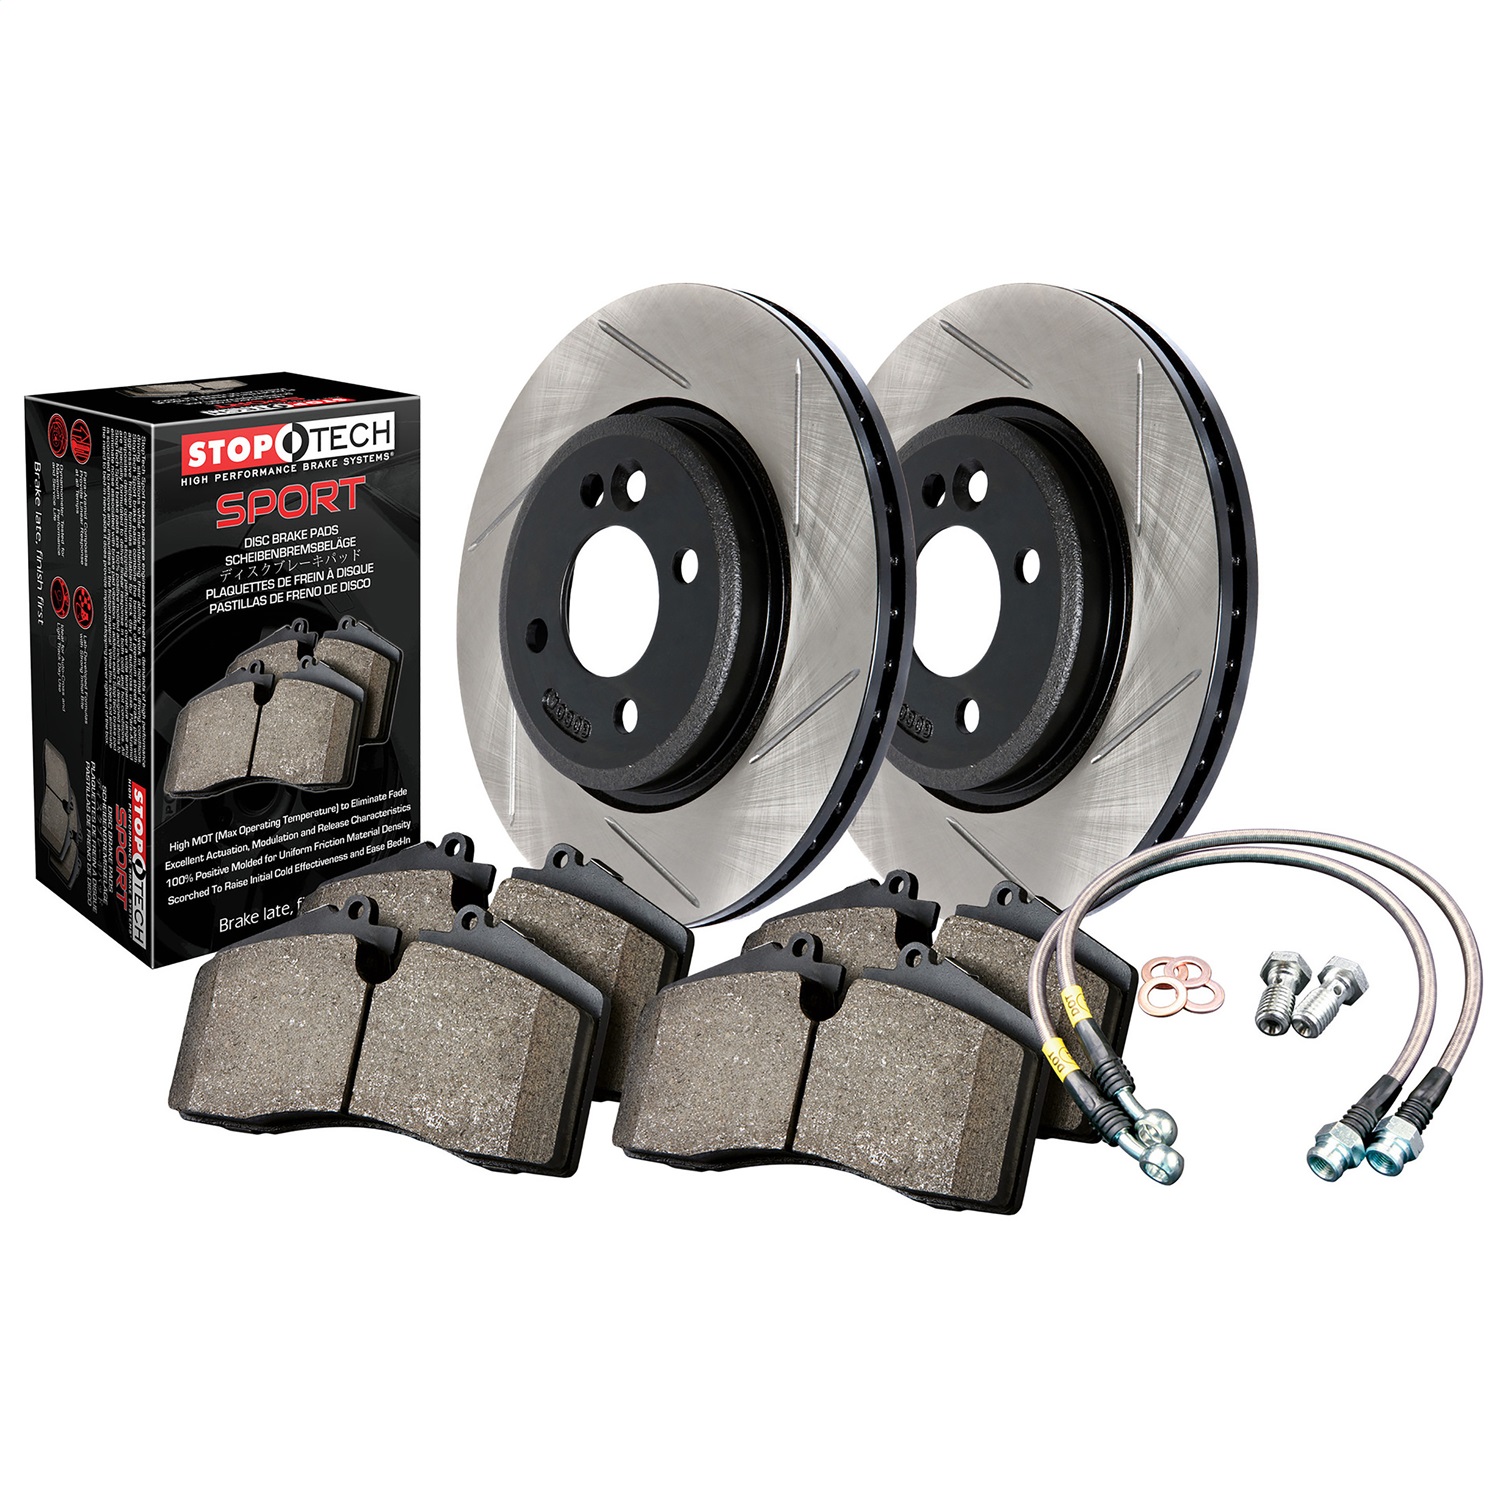 StopTech 977.63001R Sport Disc Brake Kit w/Slotted Rotors